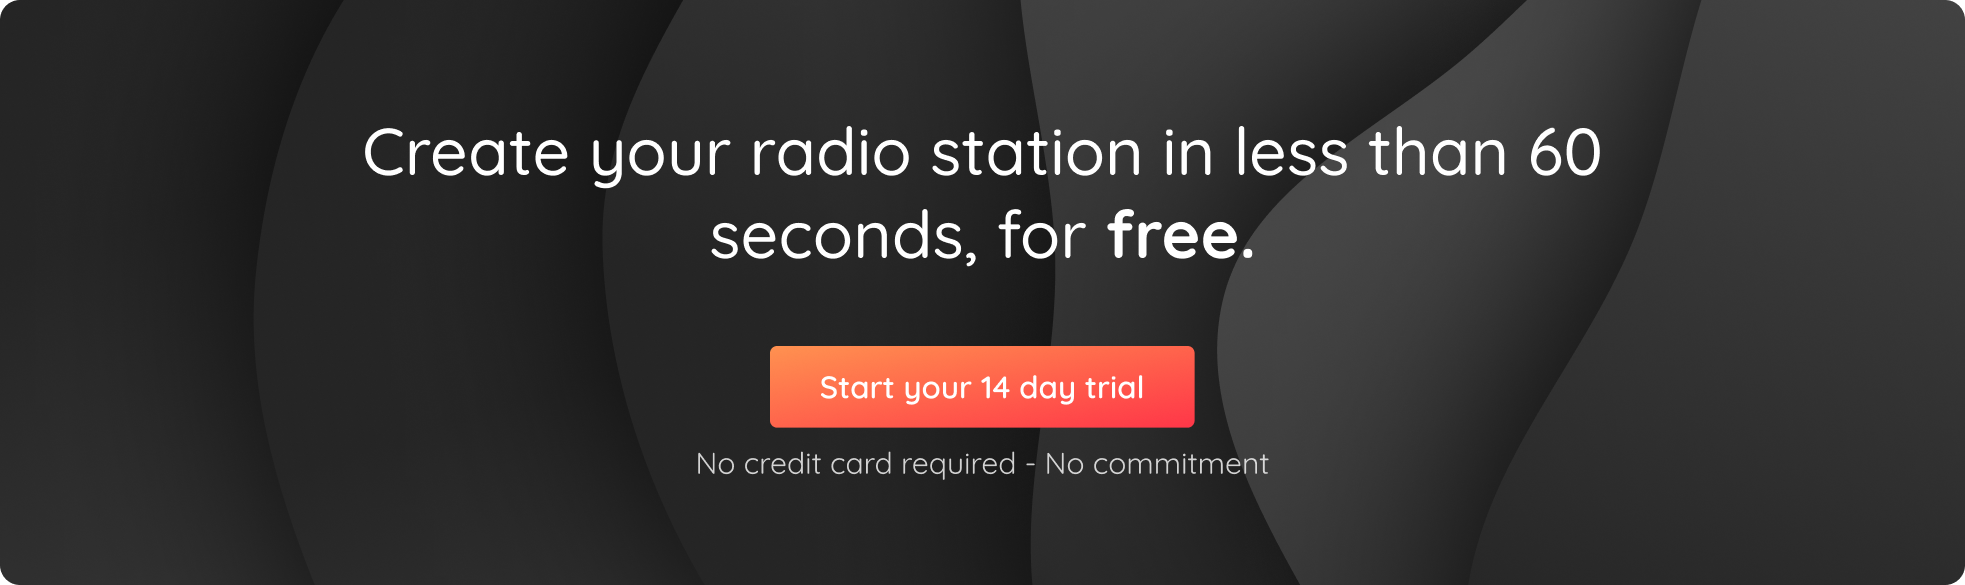 CTA-EN create your radio station online for free